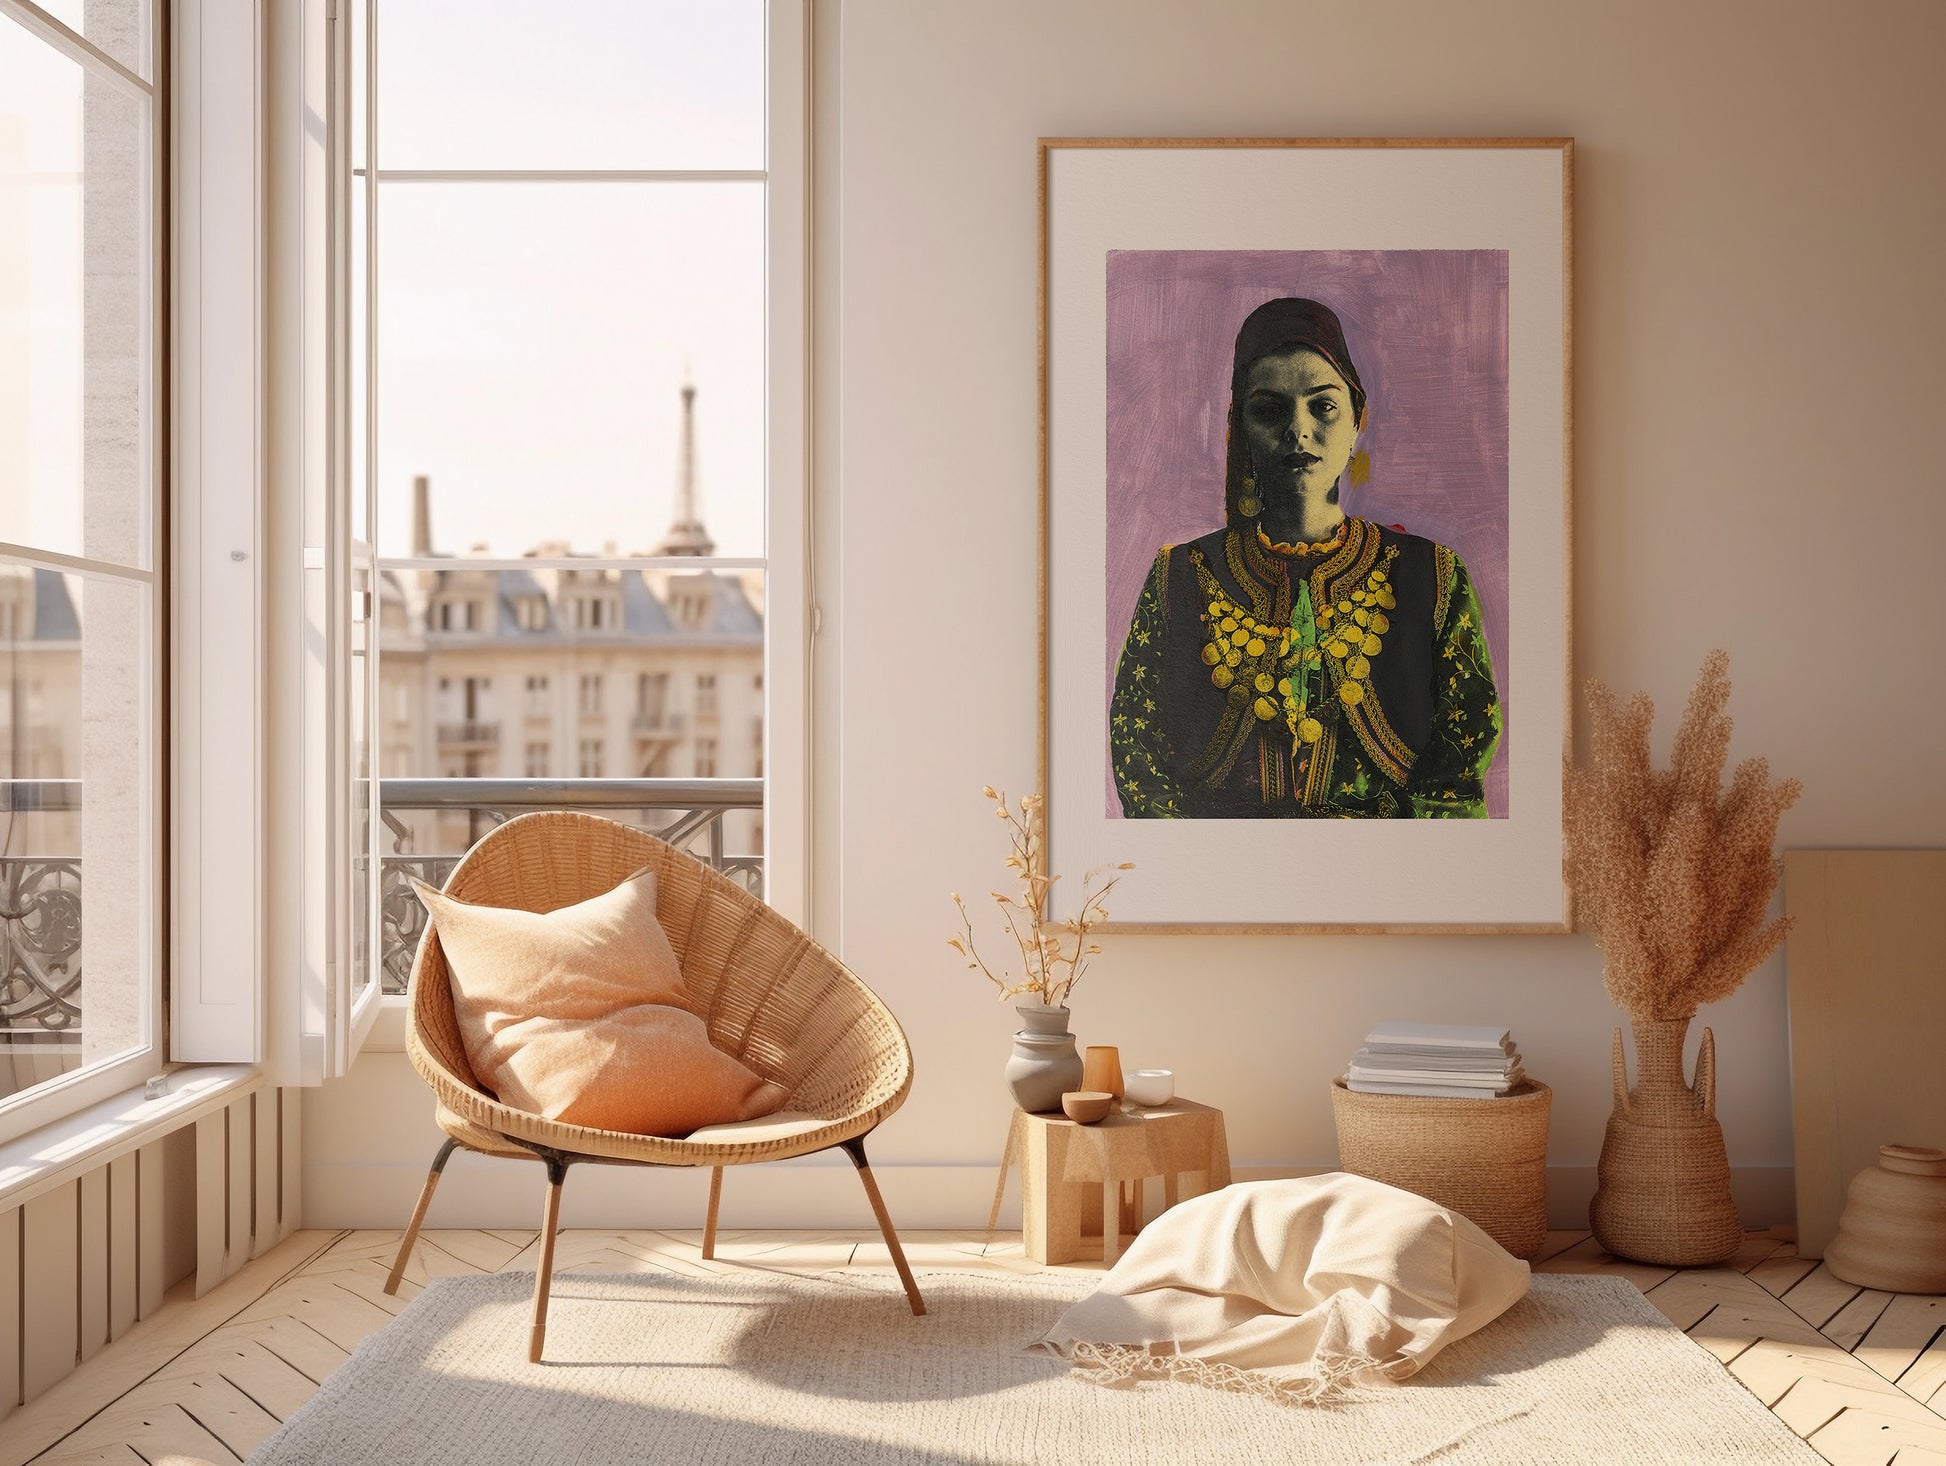 Painting Pop Art Wall Art from Greece | Mauve Kastoria Urban Costume from Macedonia, by George Tatakis - inside a room in Paris